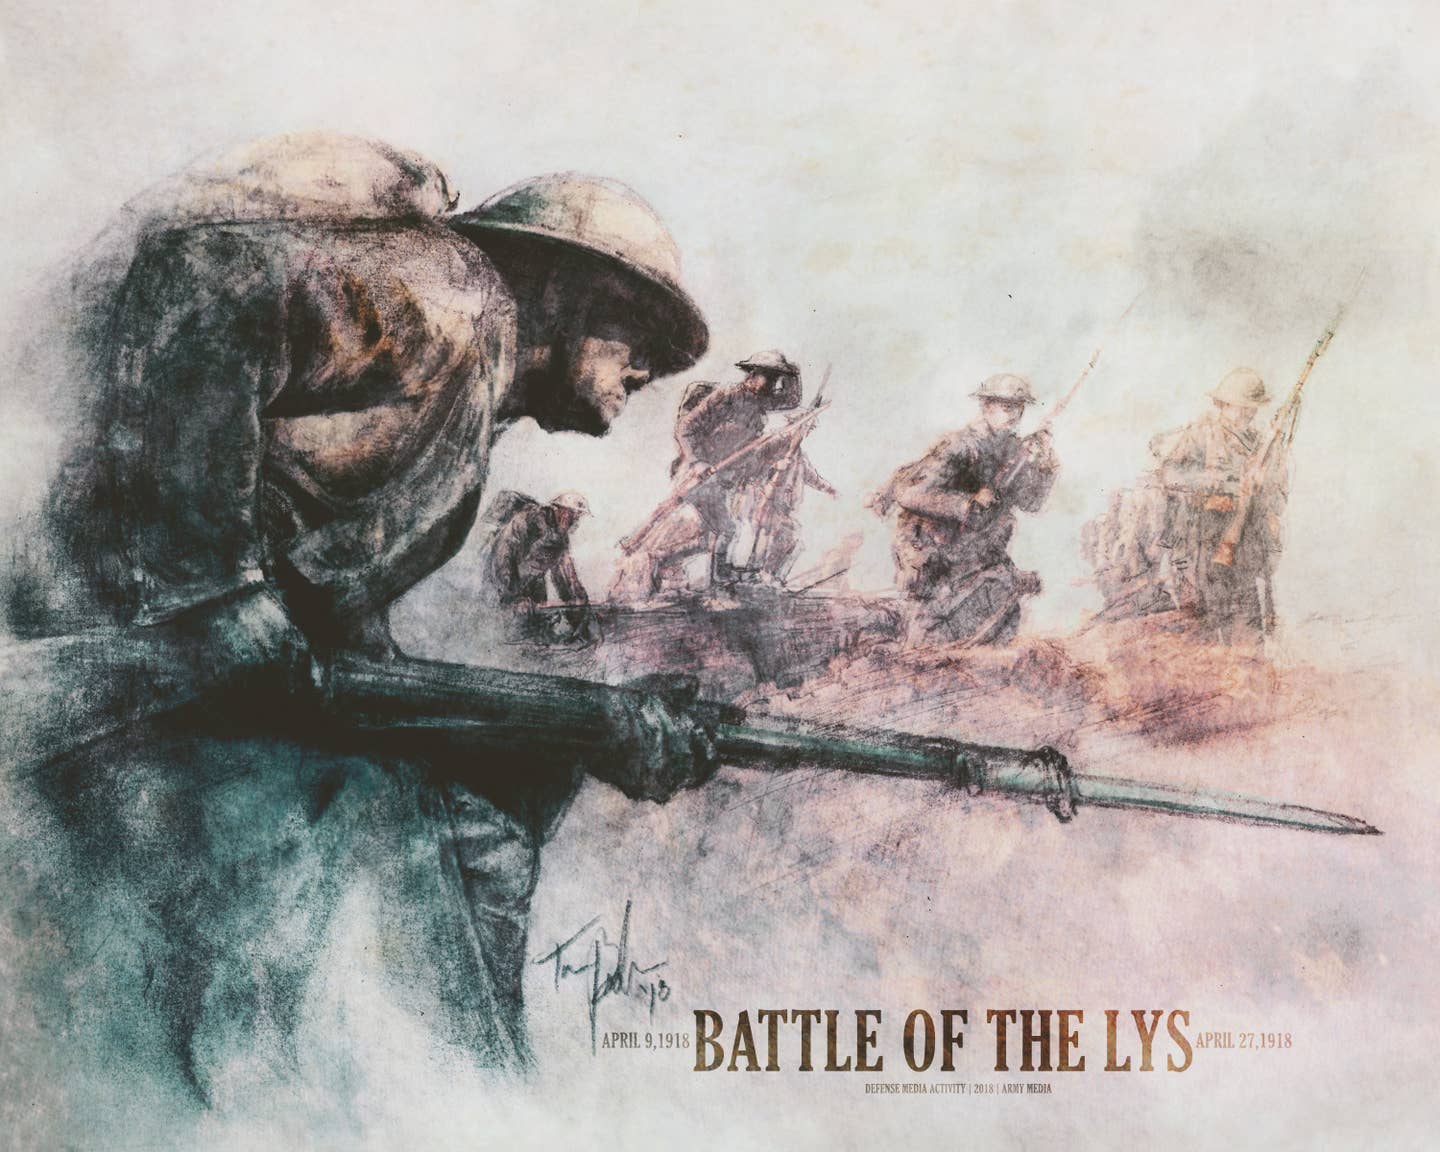 The battle for Lys took place April 9 - 27, 1918 and is one of the U.S. Army's campaign streamers. However, most of the combatants were French, British and German.